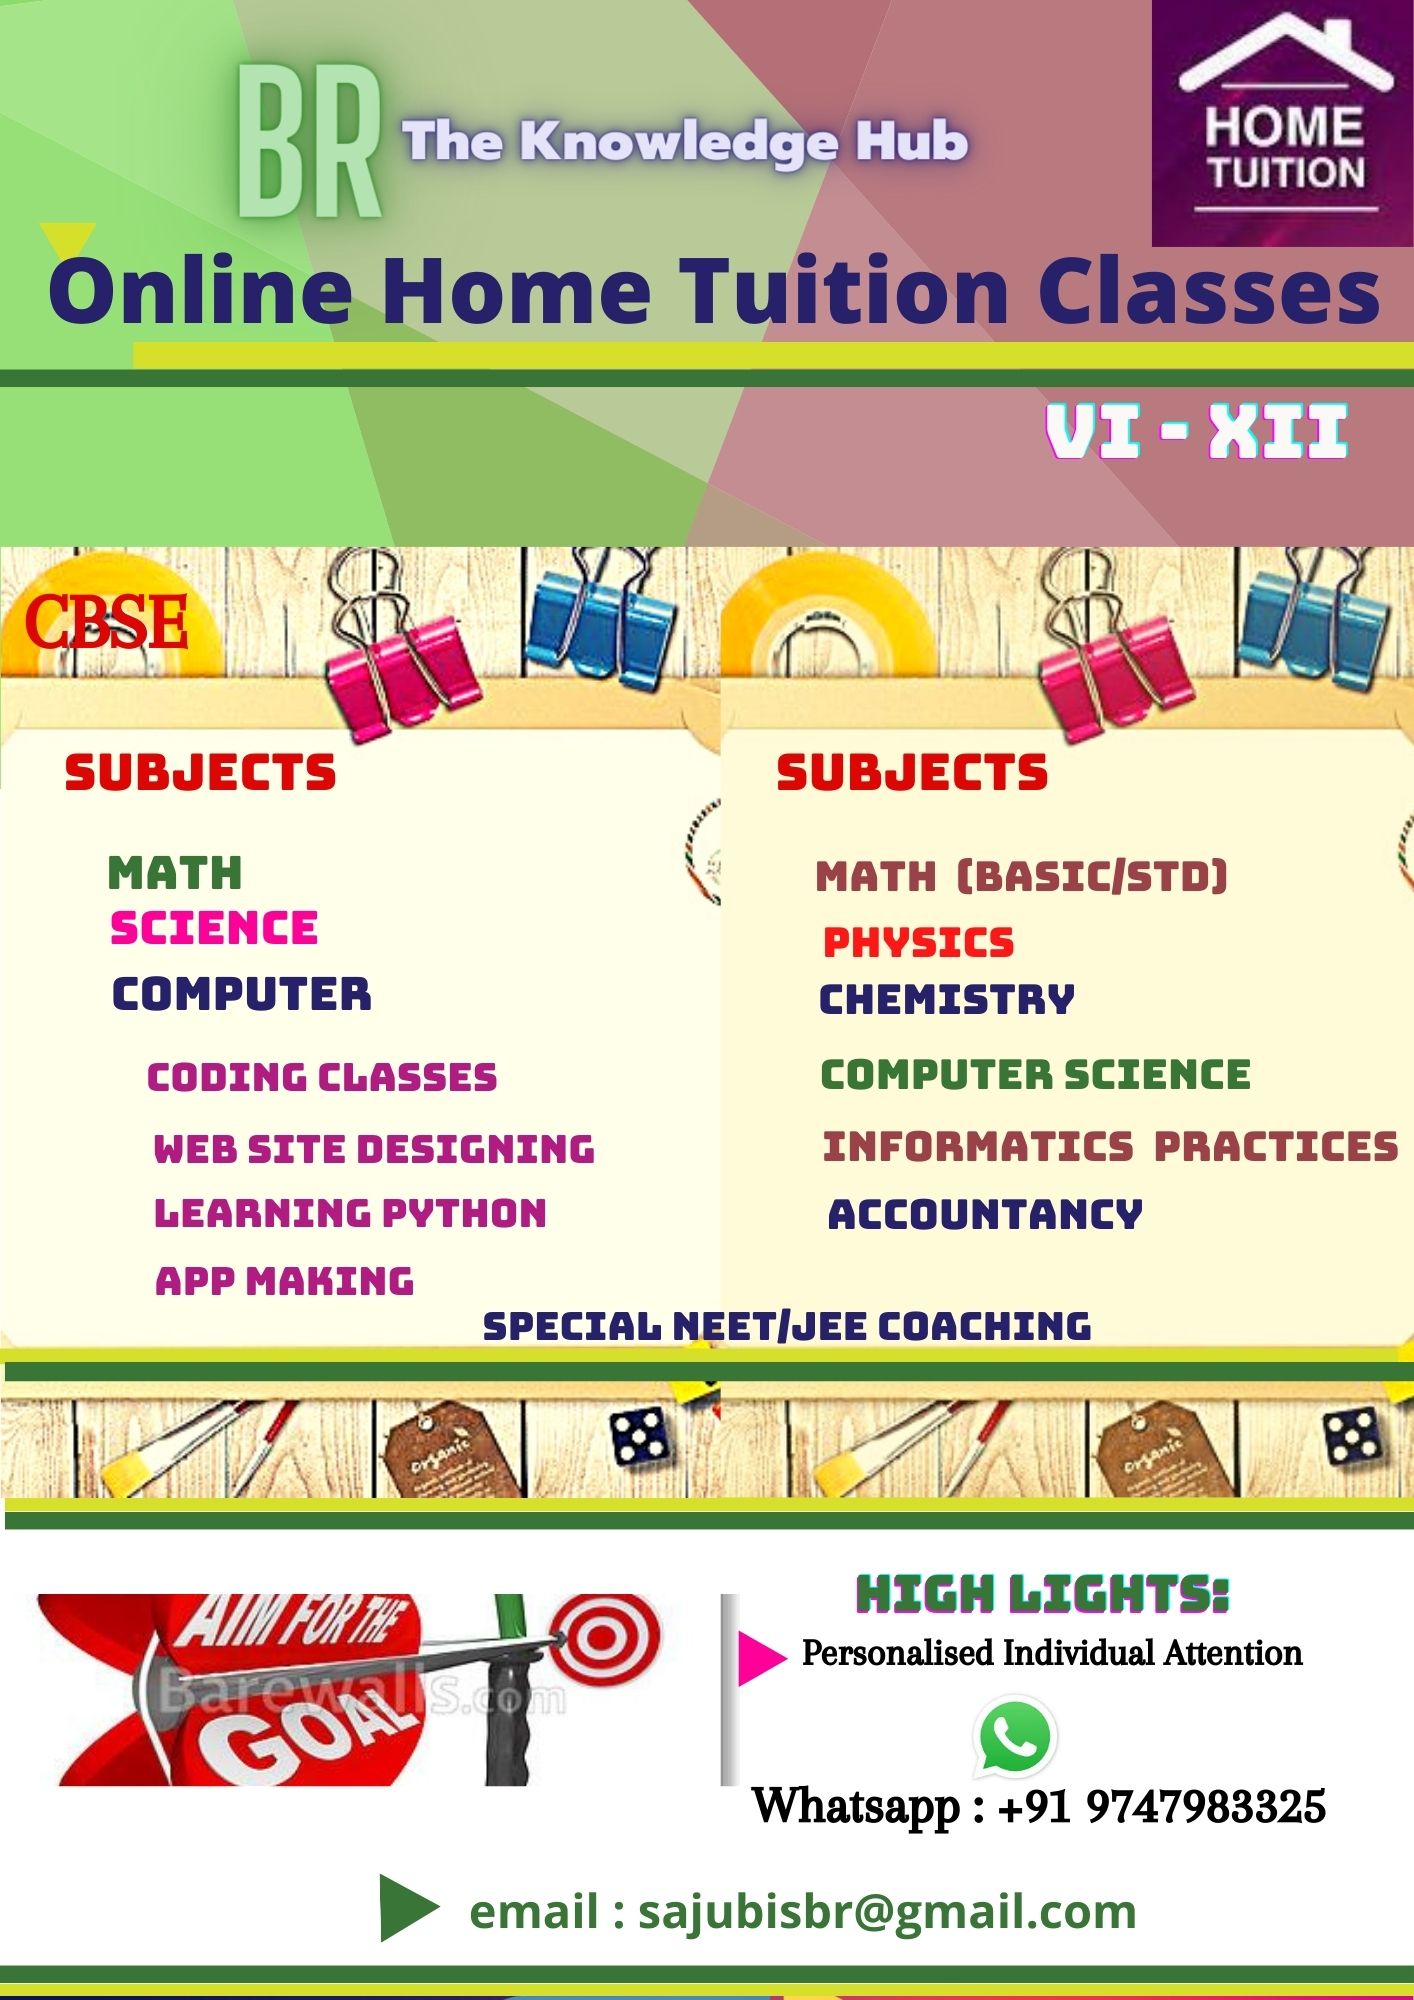 BR ONLINE HOME TUITIONS